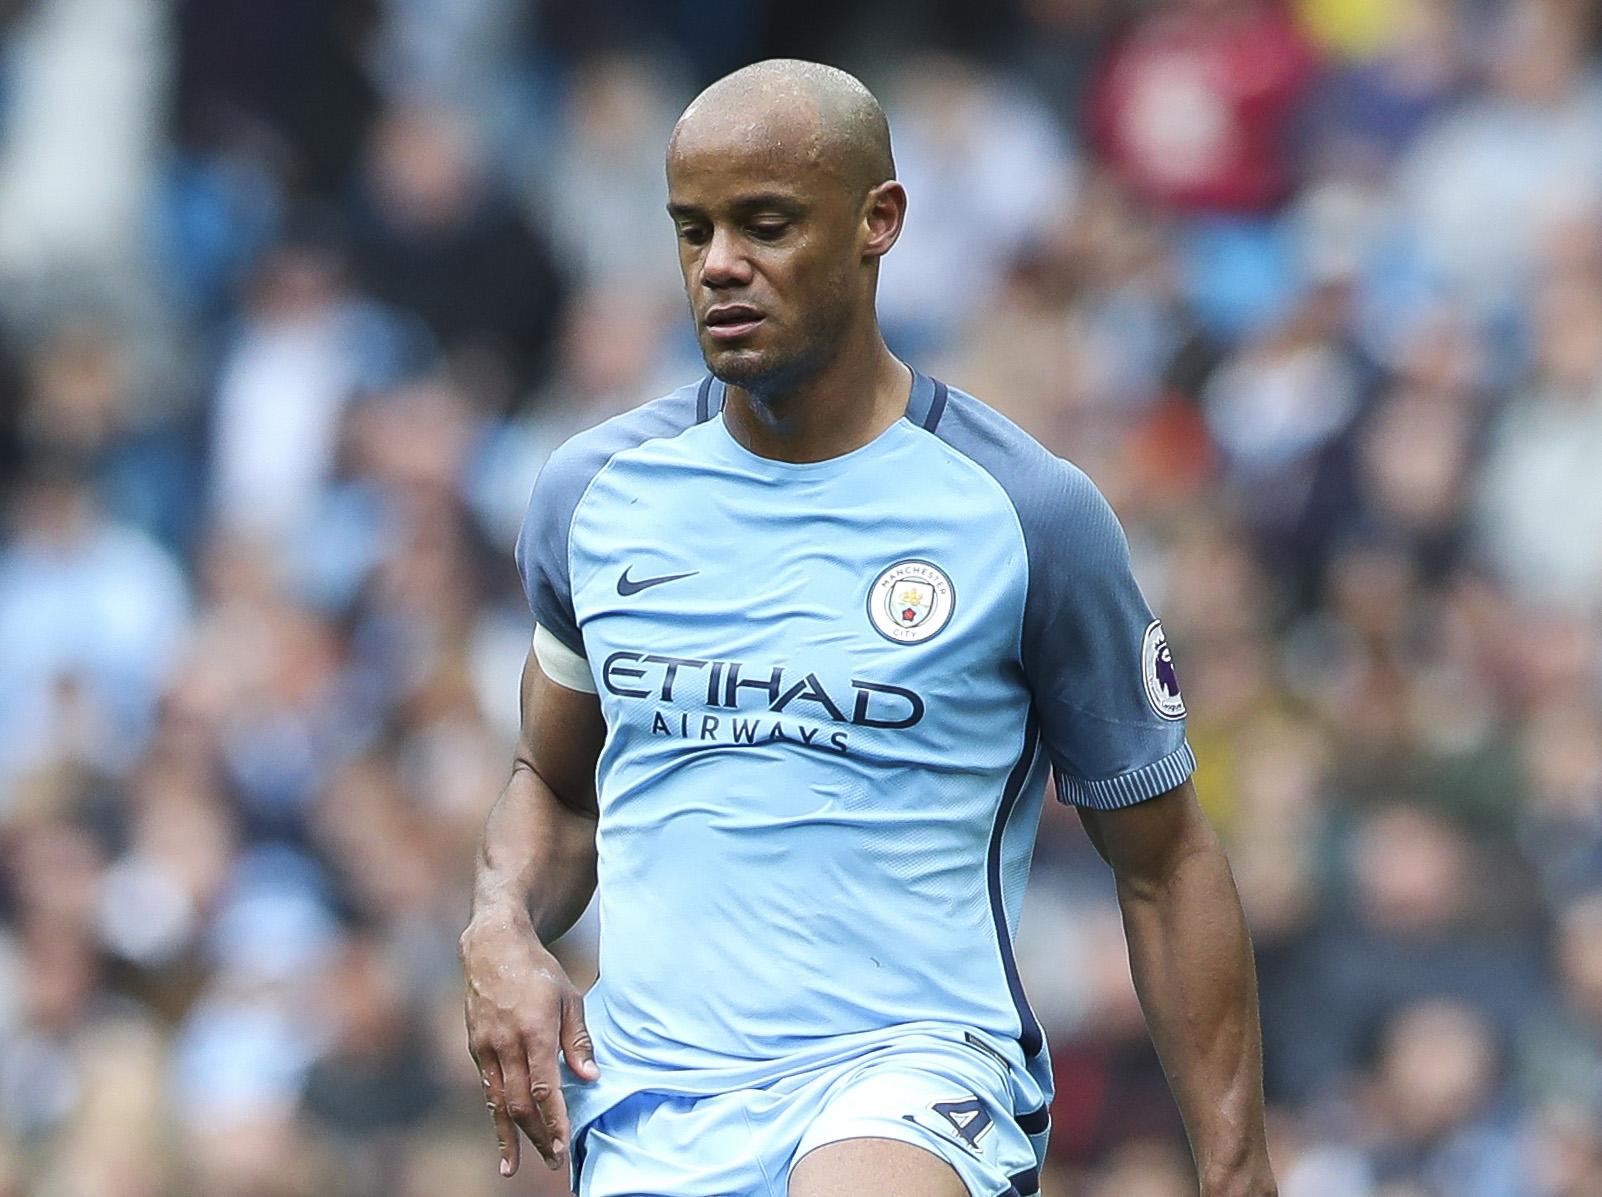 Kompany won't play a role in Saturday's clash against Liverpool